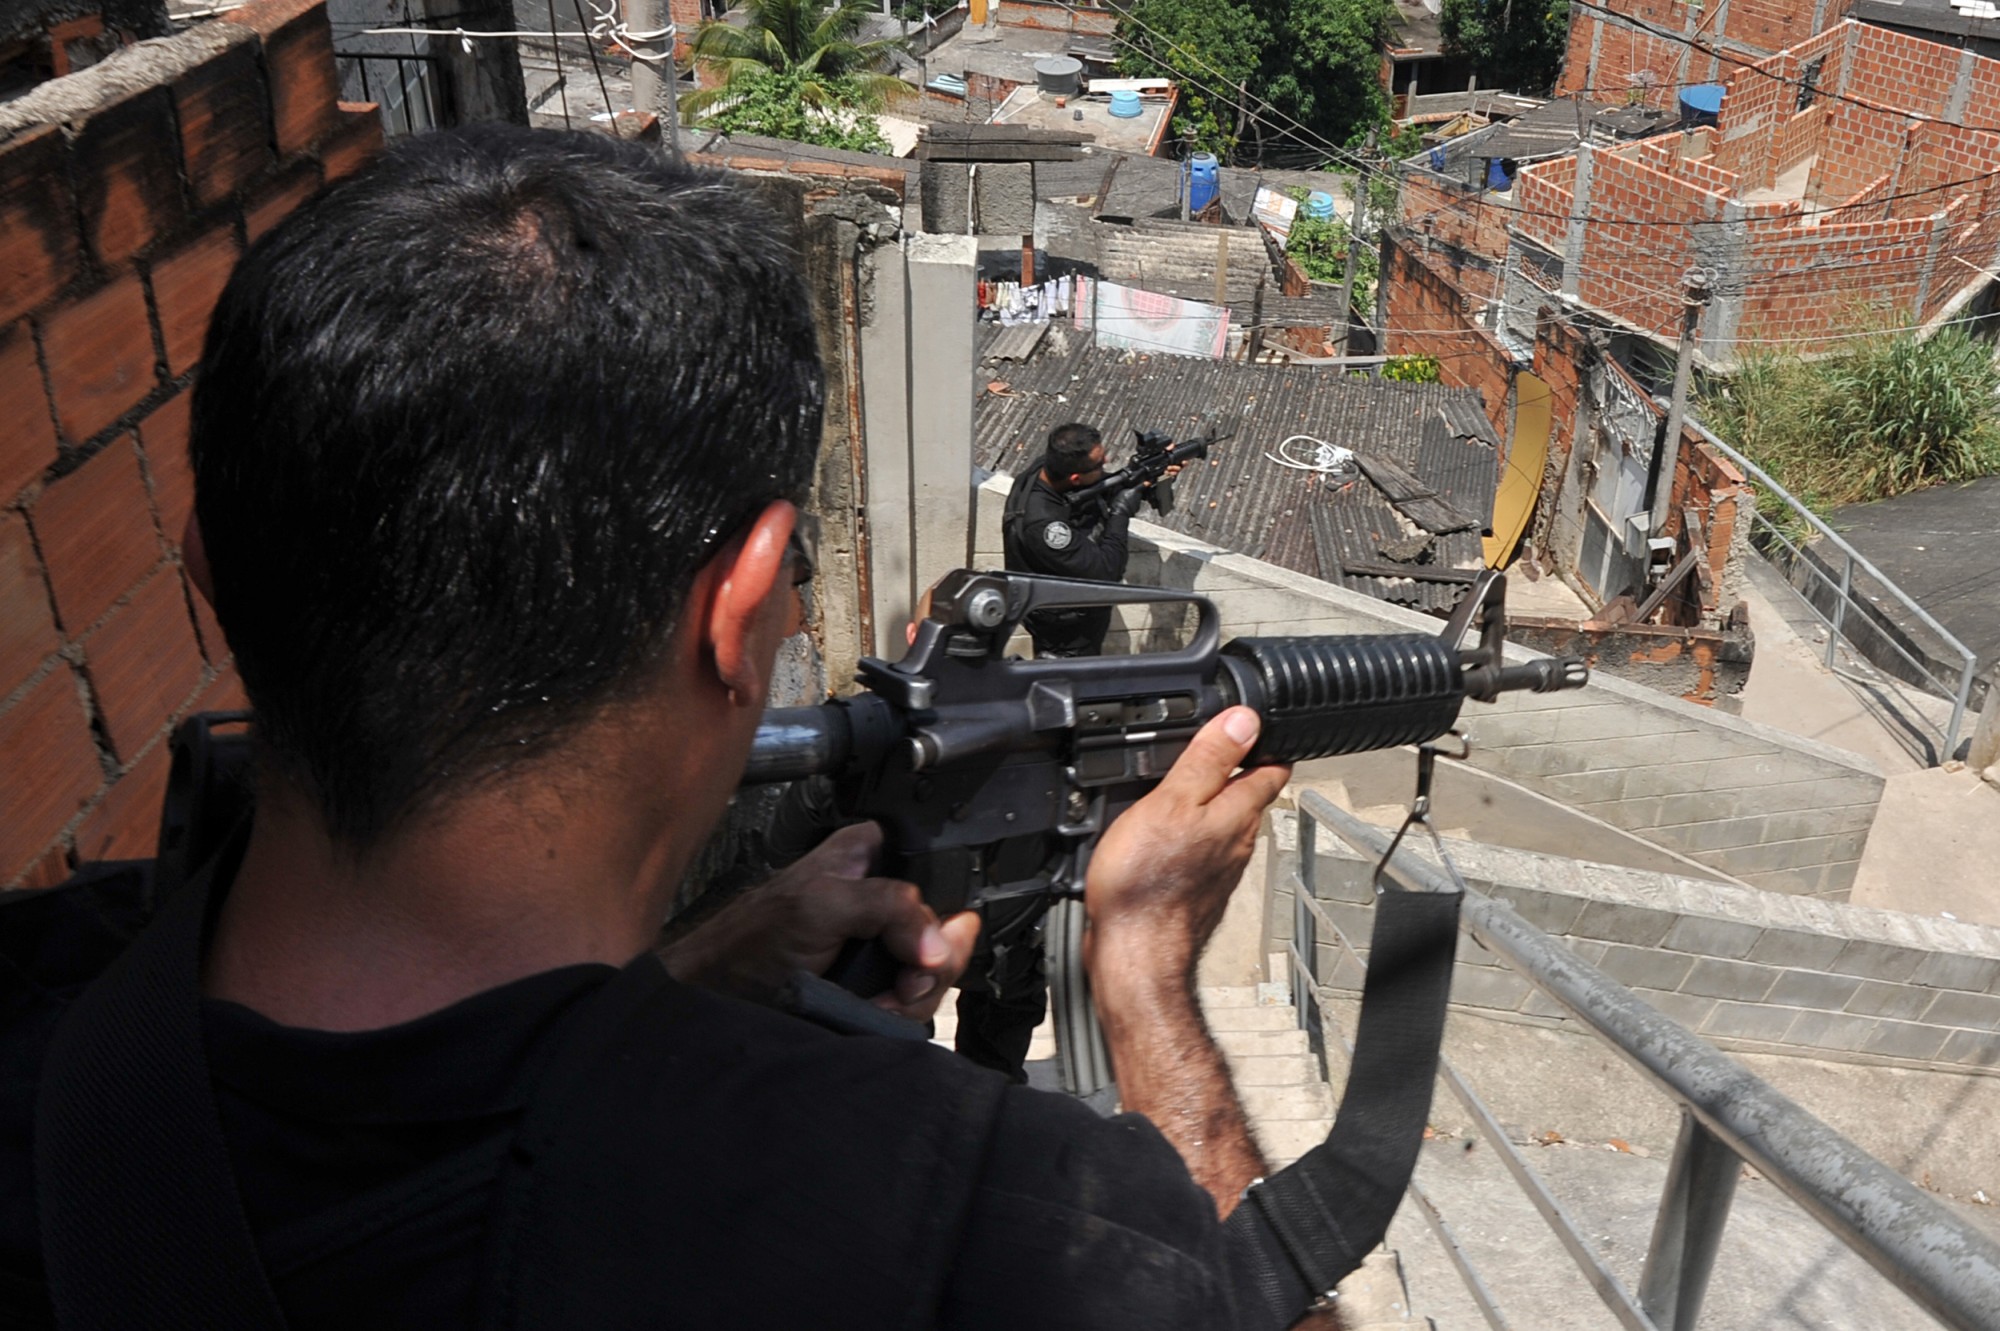 Human Rights Group Prepares Report on Police Violence in Rio